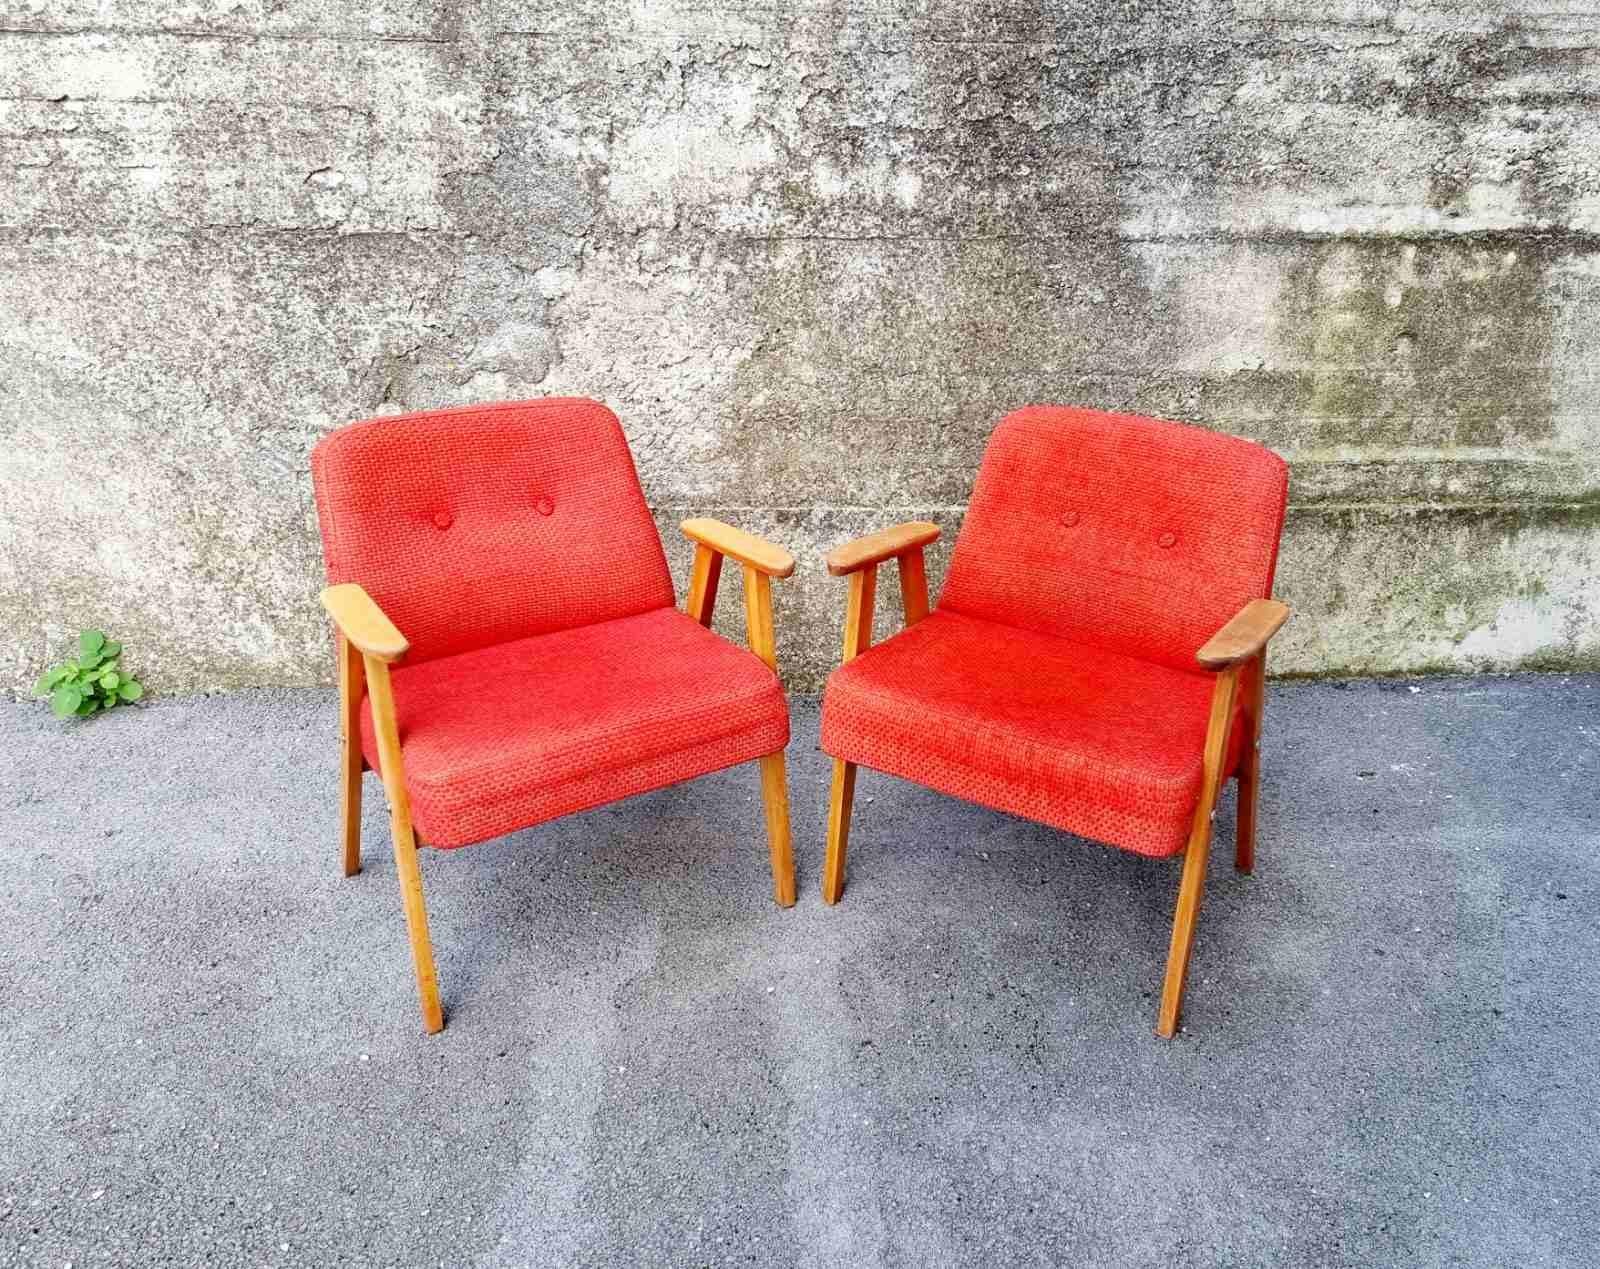 Pair of Midcentury Polish Armchairs, Model 366, Design by Jozef Chierowski 60s For Sale 2